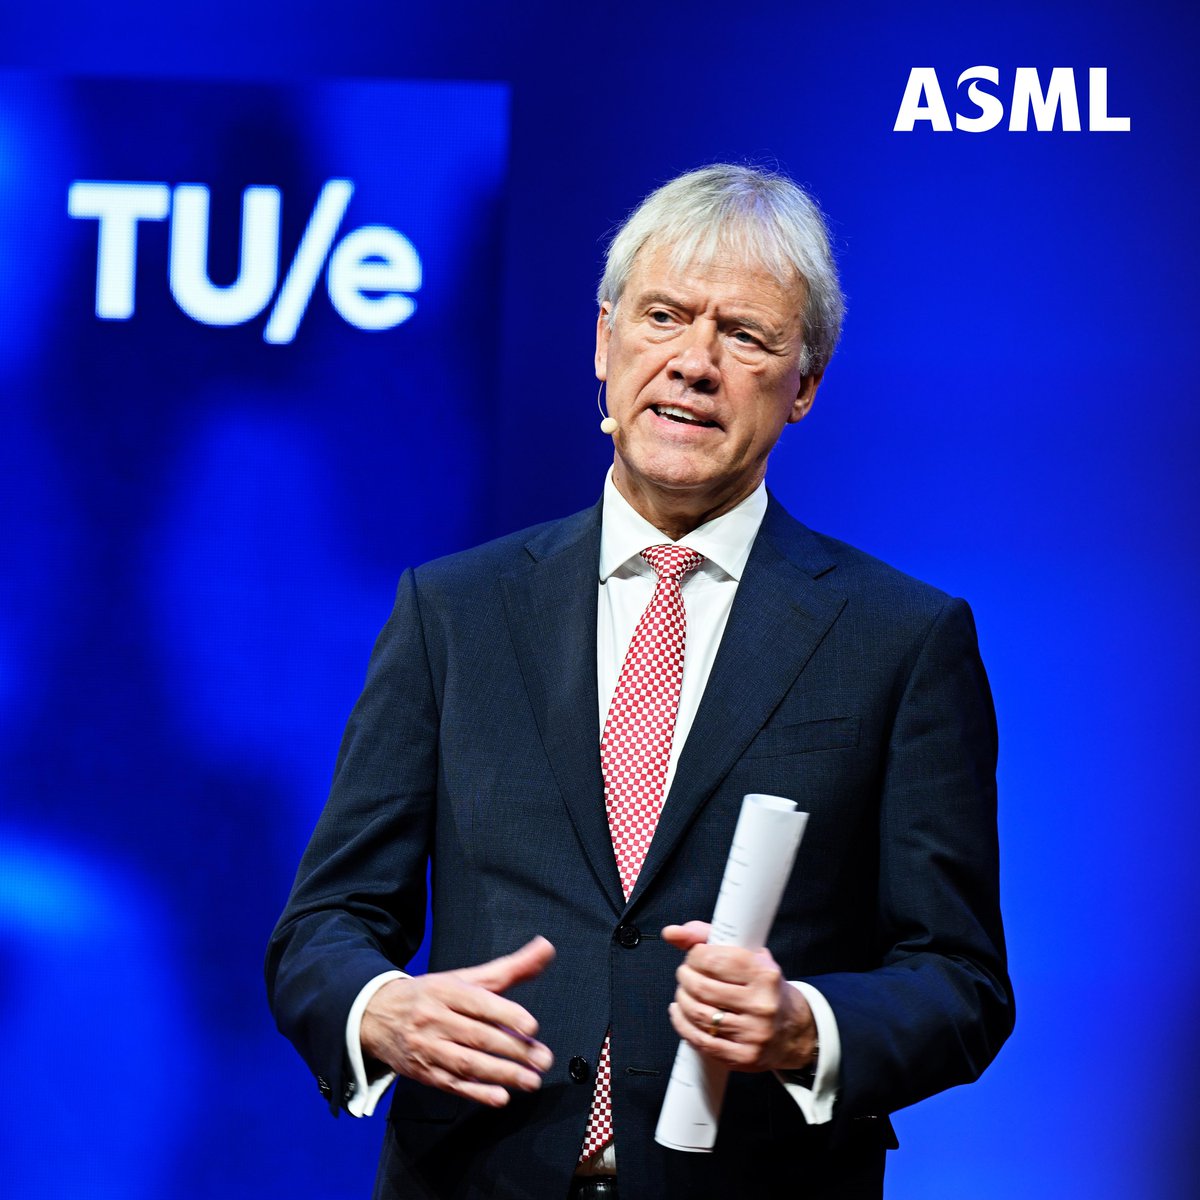 'The bigger the problem, the bigger the innovation.' On the future earning power of the Netherlands and Europe, our CEO, Peter Wennink, stressed that we must overcome complacency and promote collaboration as well as innovation at the opening of the academic year at @TUeindhoven.